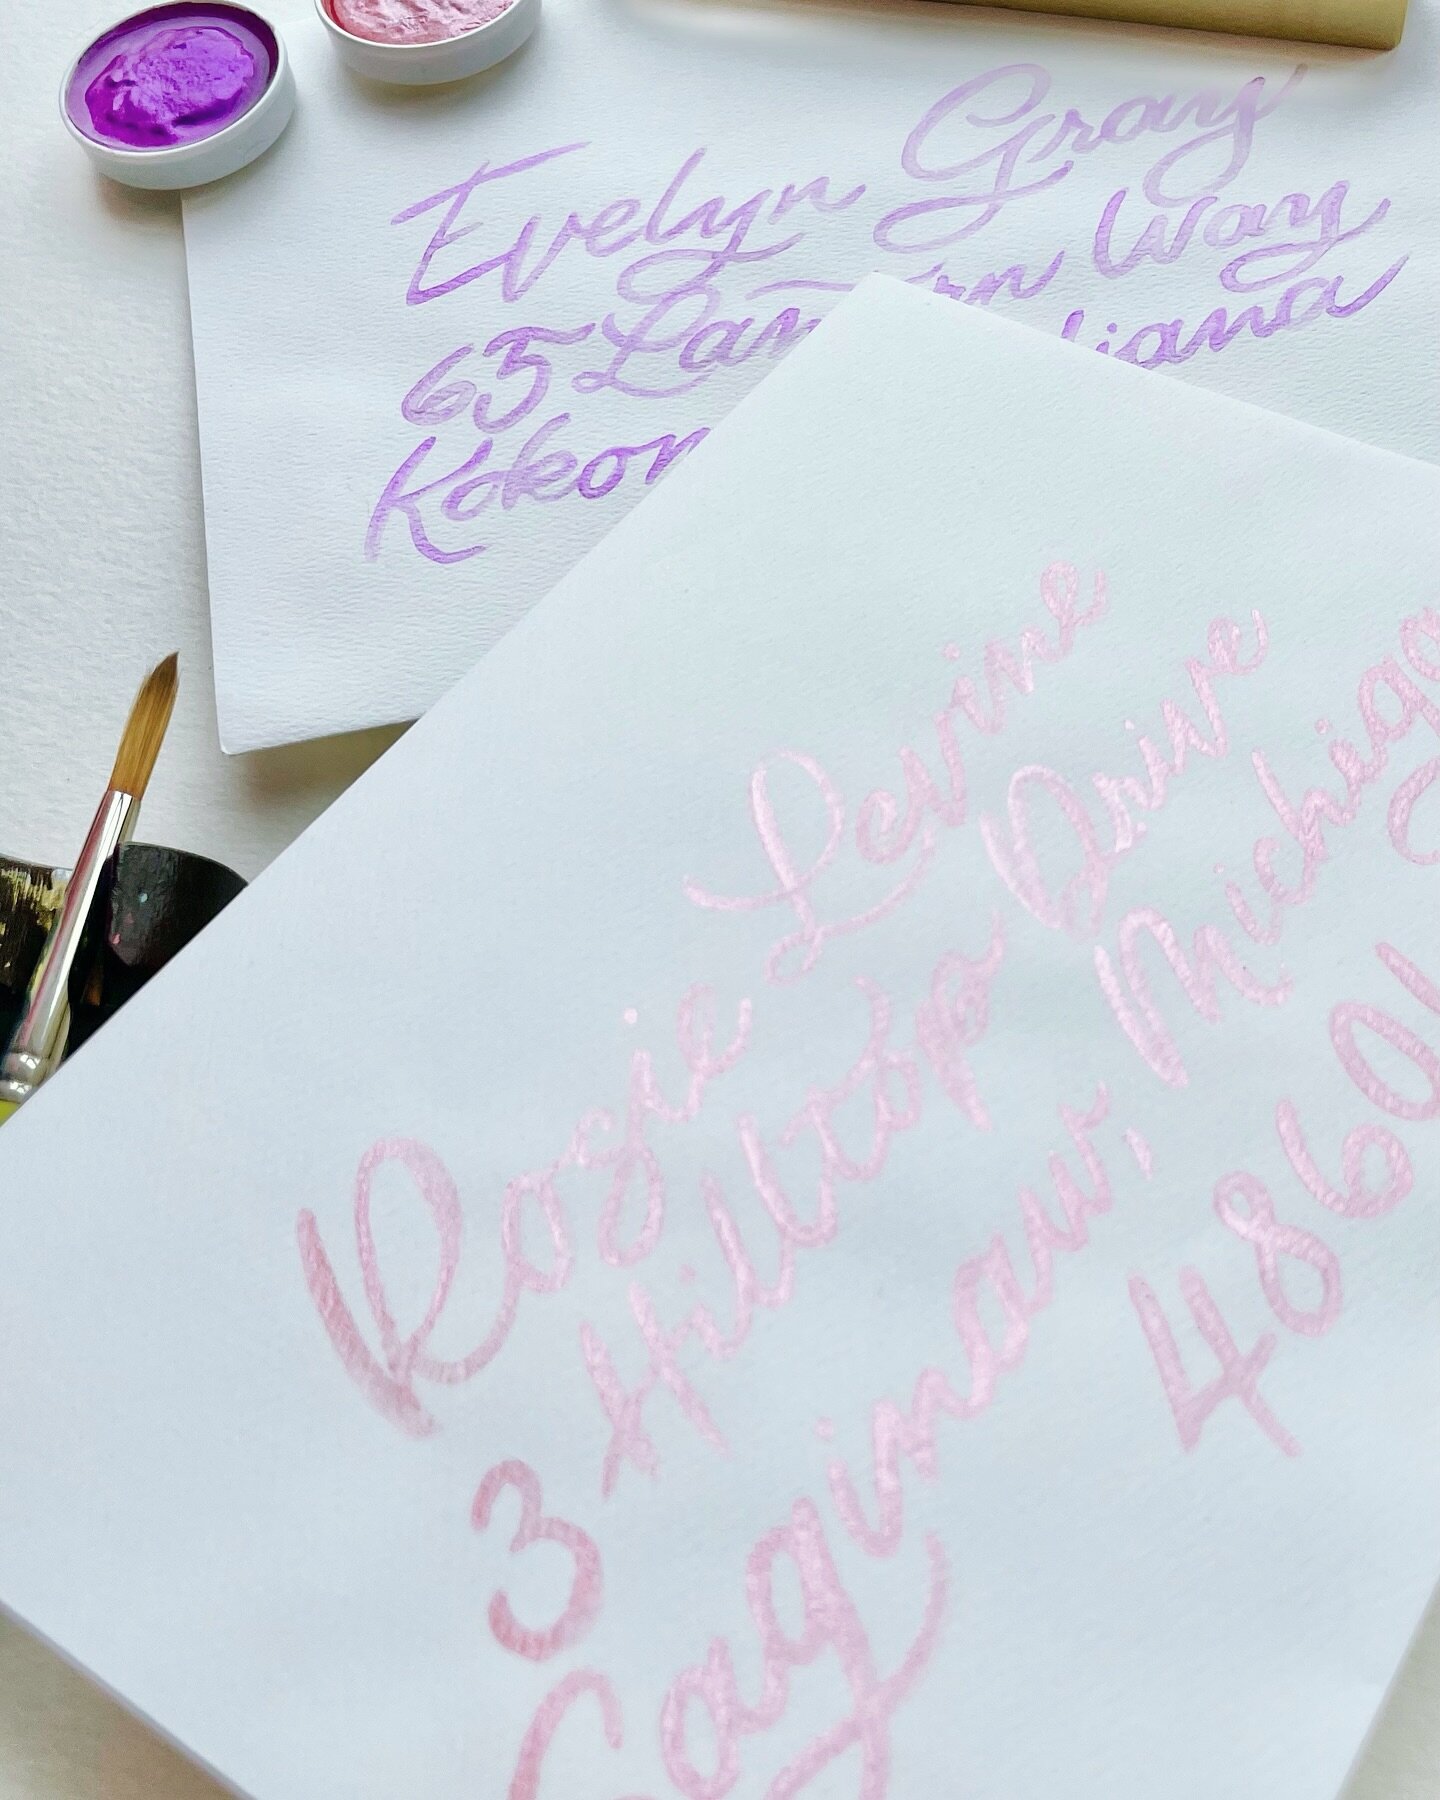 💌 Hand-painted envelopes bringing a personal touch to every invite. 💕
✨
✨ Fictitious names and address are always used for social media posts ✨
✨
#gertiescalligraphy #Calligrapher #weddingcalligrapher #eventcalligraphy #EnvelopeArt #HandPaintedEnve